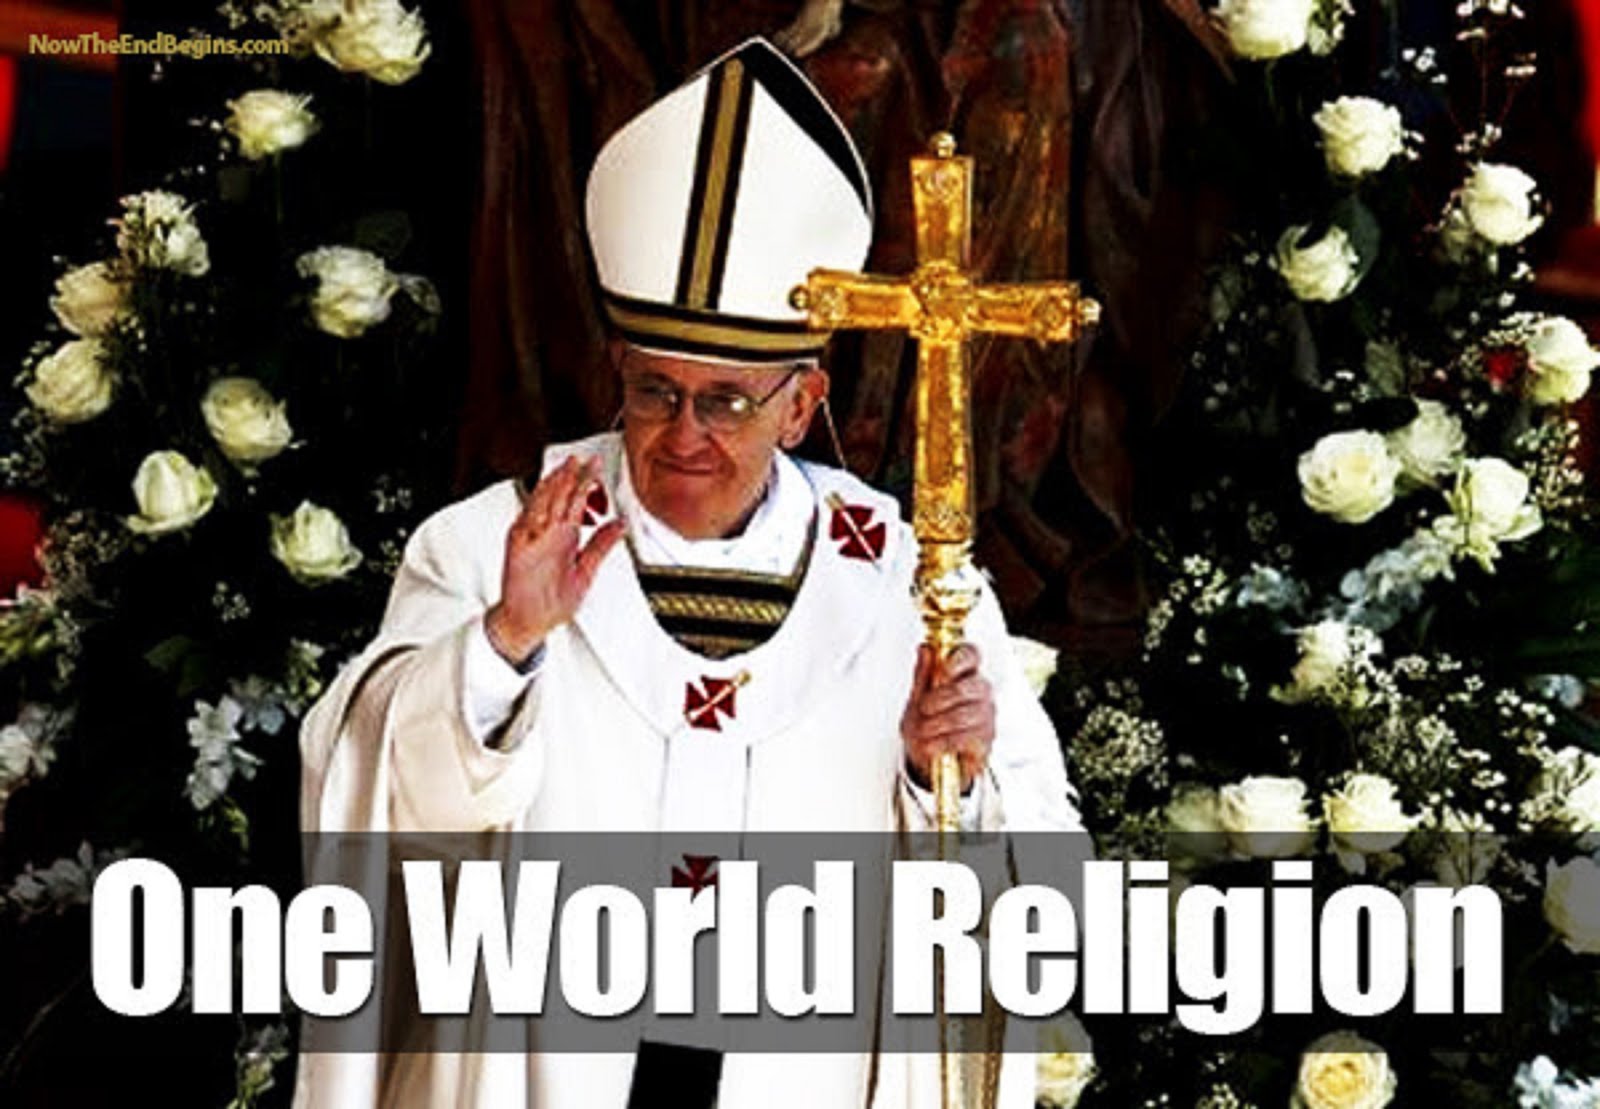 POPE FRANCIS' ONE WORLD RELIGION